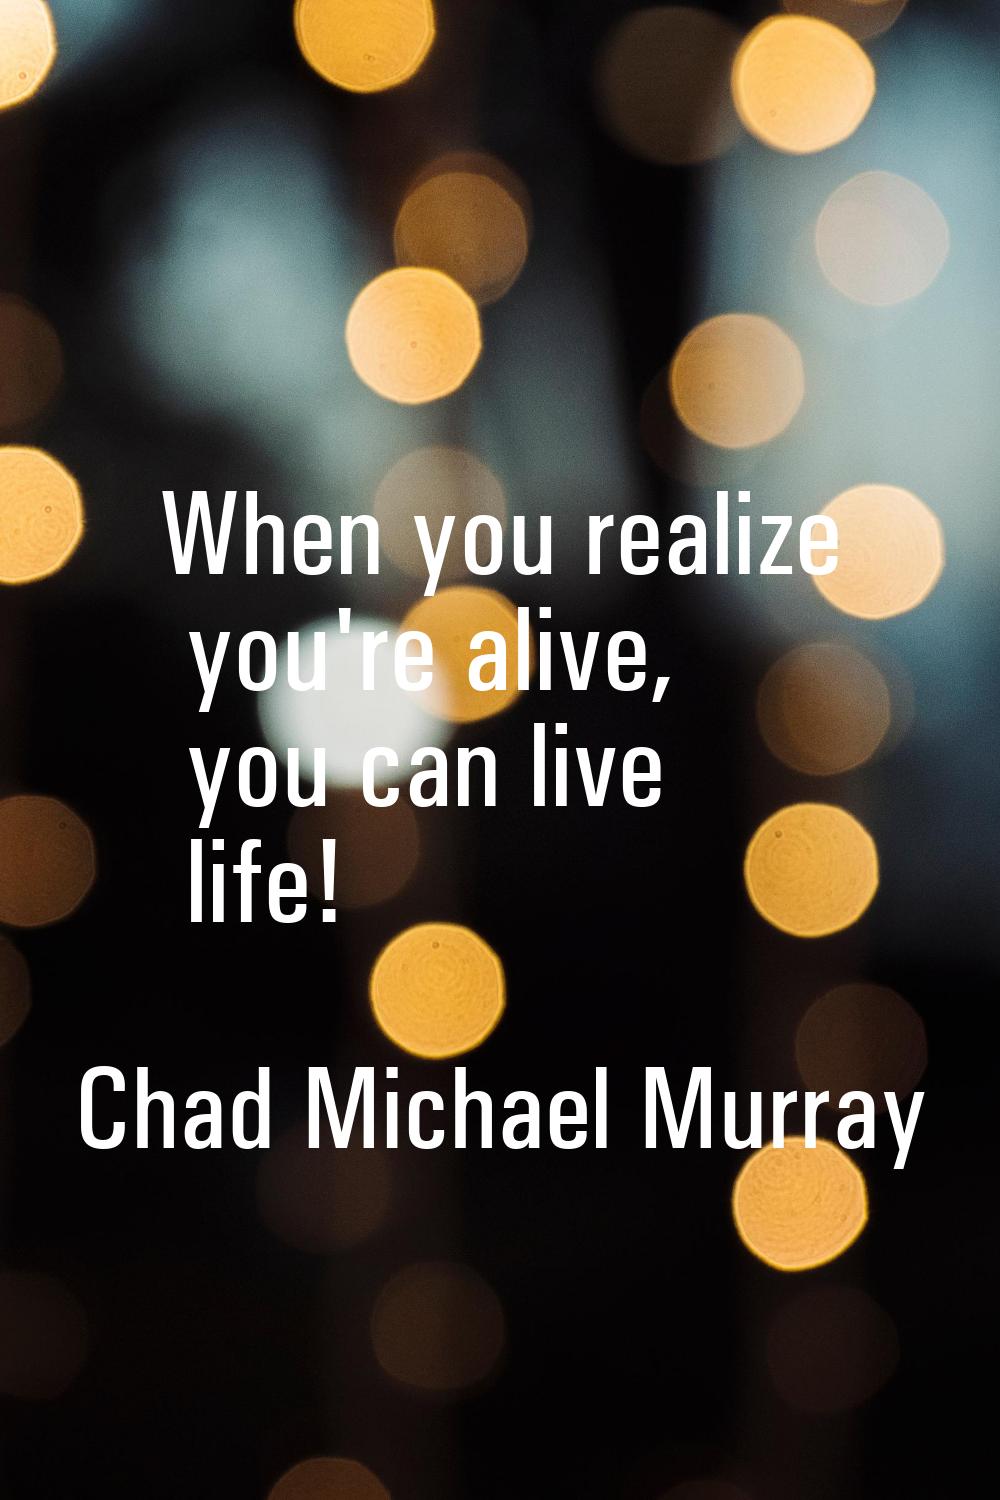 When you realize you're alive, you can live life!